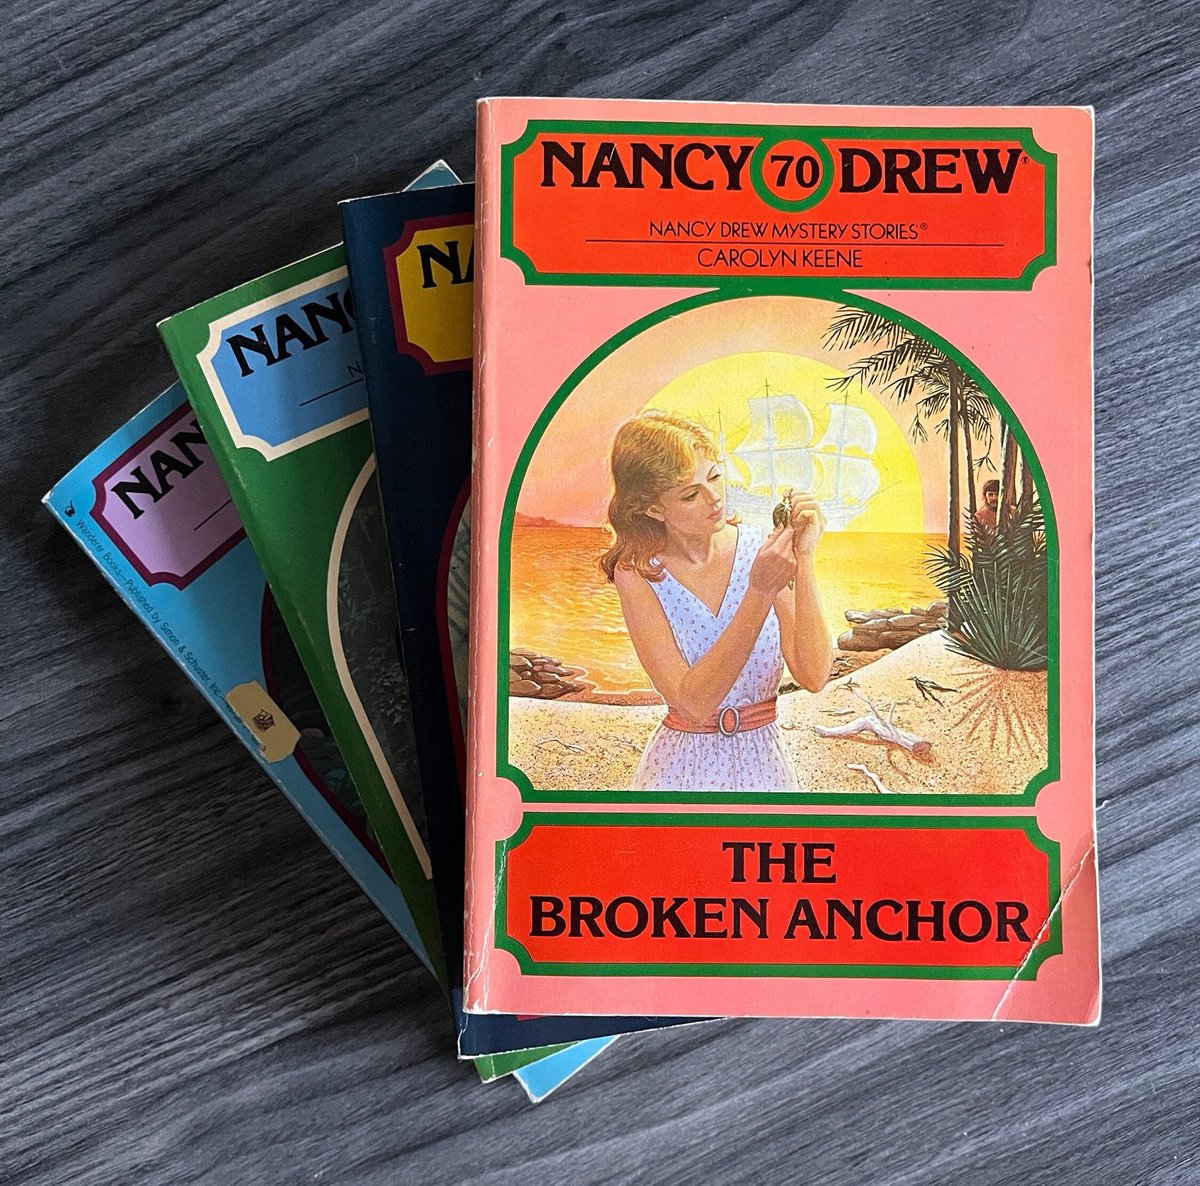 Excited to share this item from my #etsy shop: Nancy Drew Mystery Stories, Vintage Paperbacks by Carolyn Keene - 4 to choose from #nancydrew #nancydrew1980s #nancydrewpaperback #carolynkeene #mysteryseries #mysterystories #vintagepaperback etsy.me/3NFkTA8